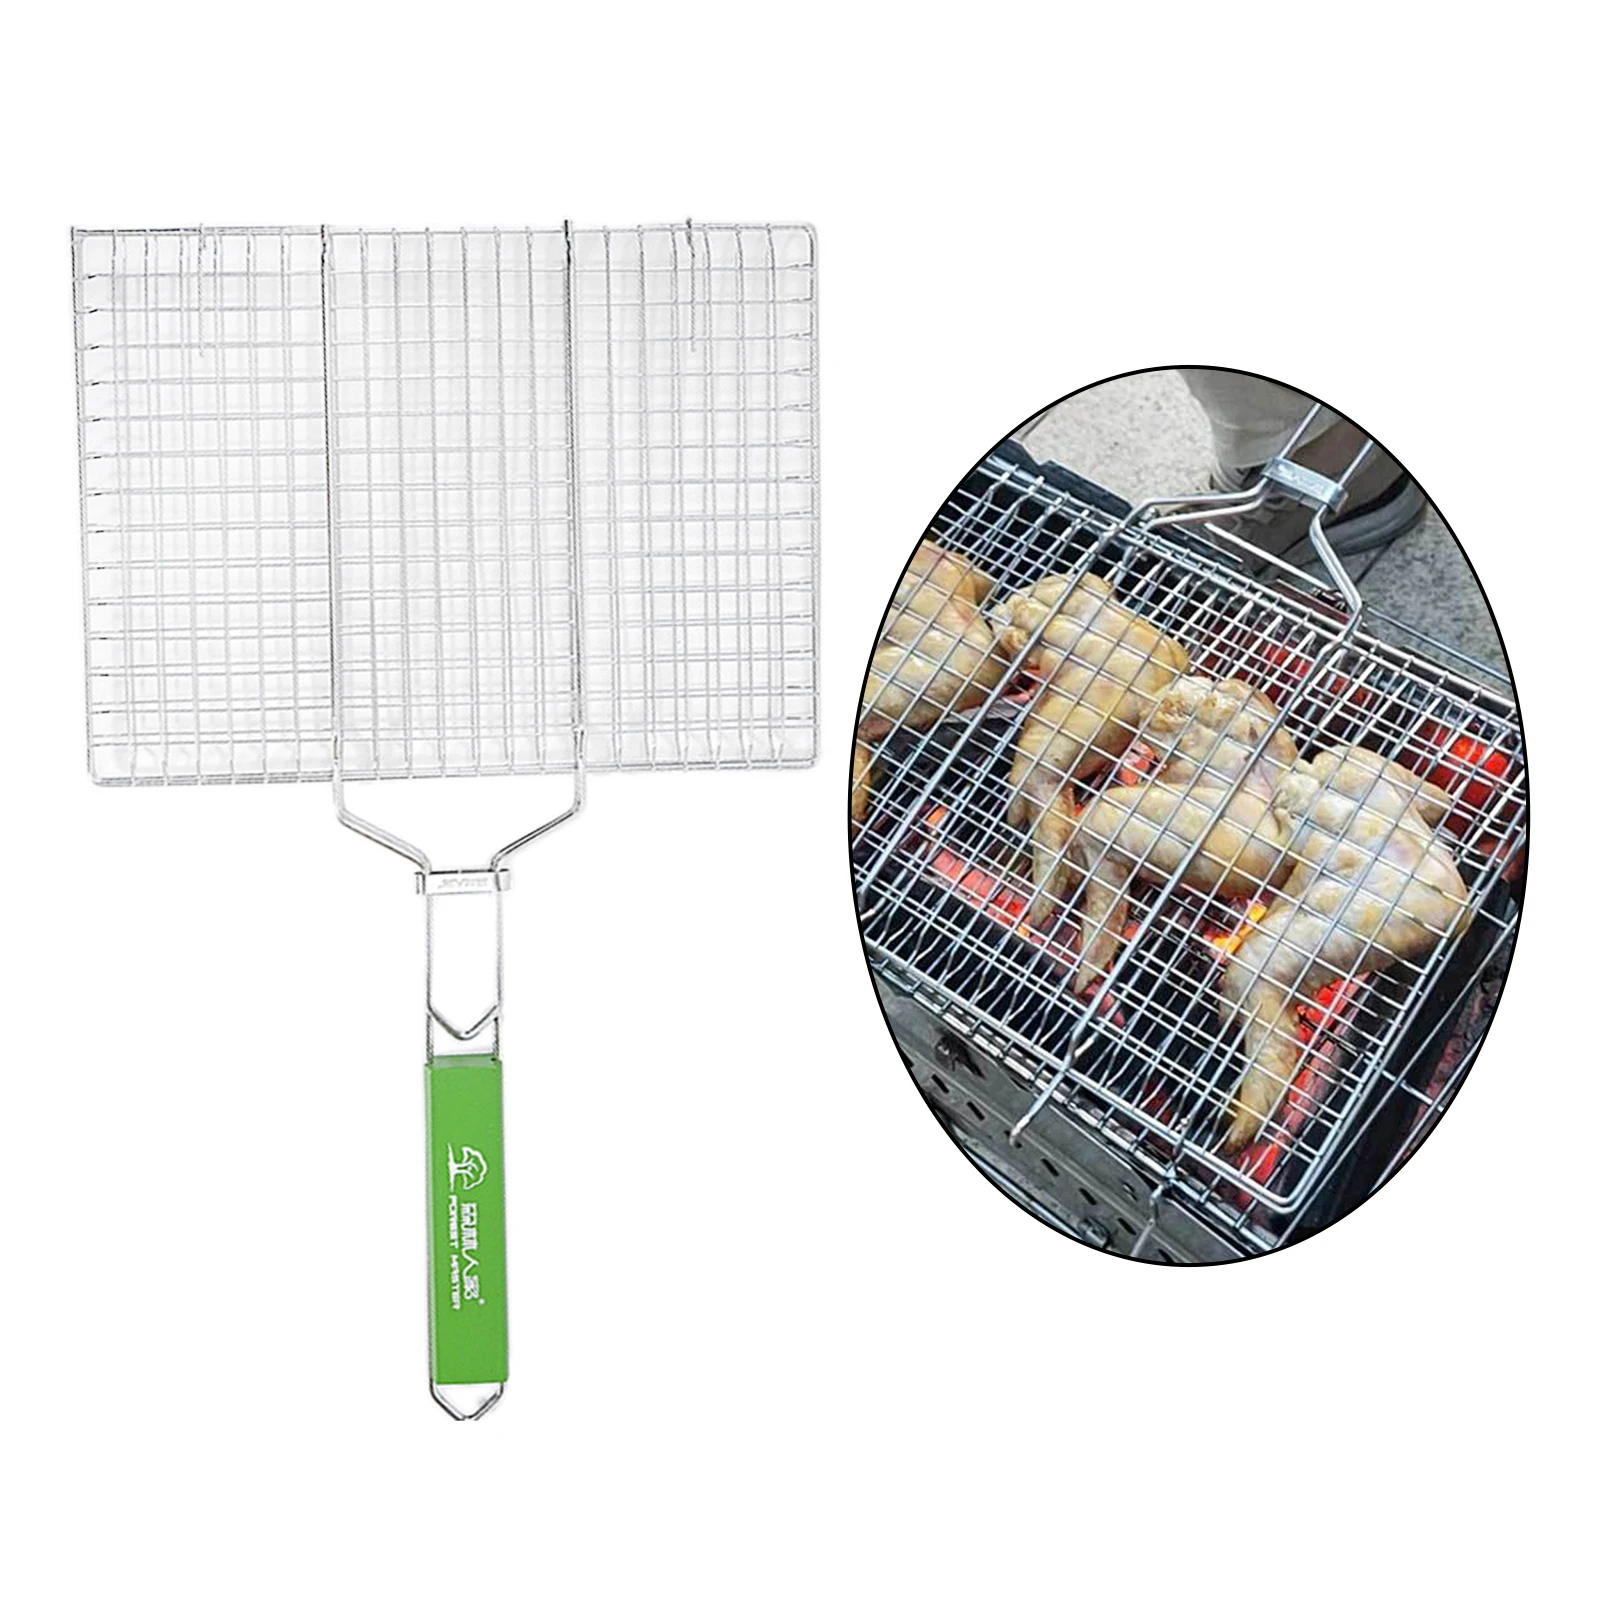 Stainless Steel Fish Grilling Basket Non-stick BBQ Net Wooden Handle Meat Fish Chicken Clip Holder Outdoor Camping Picnic Tool